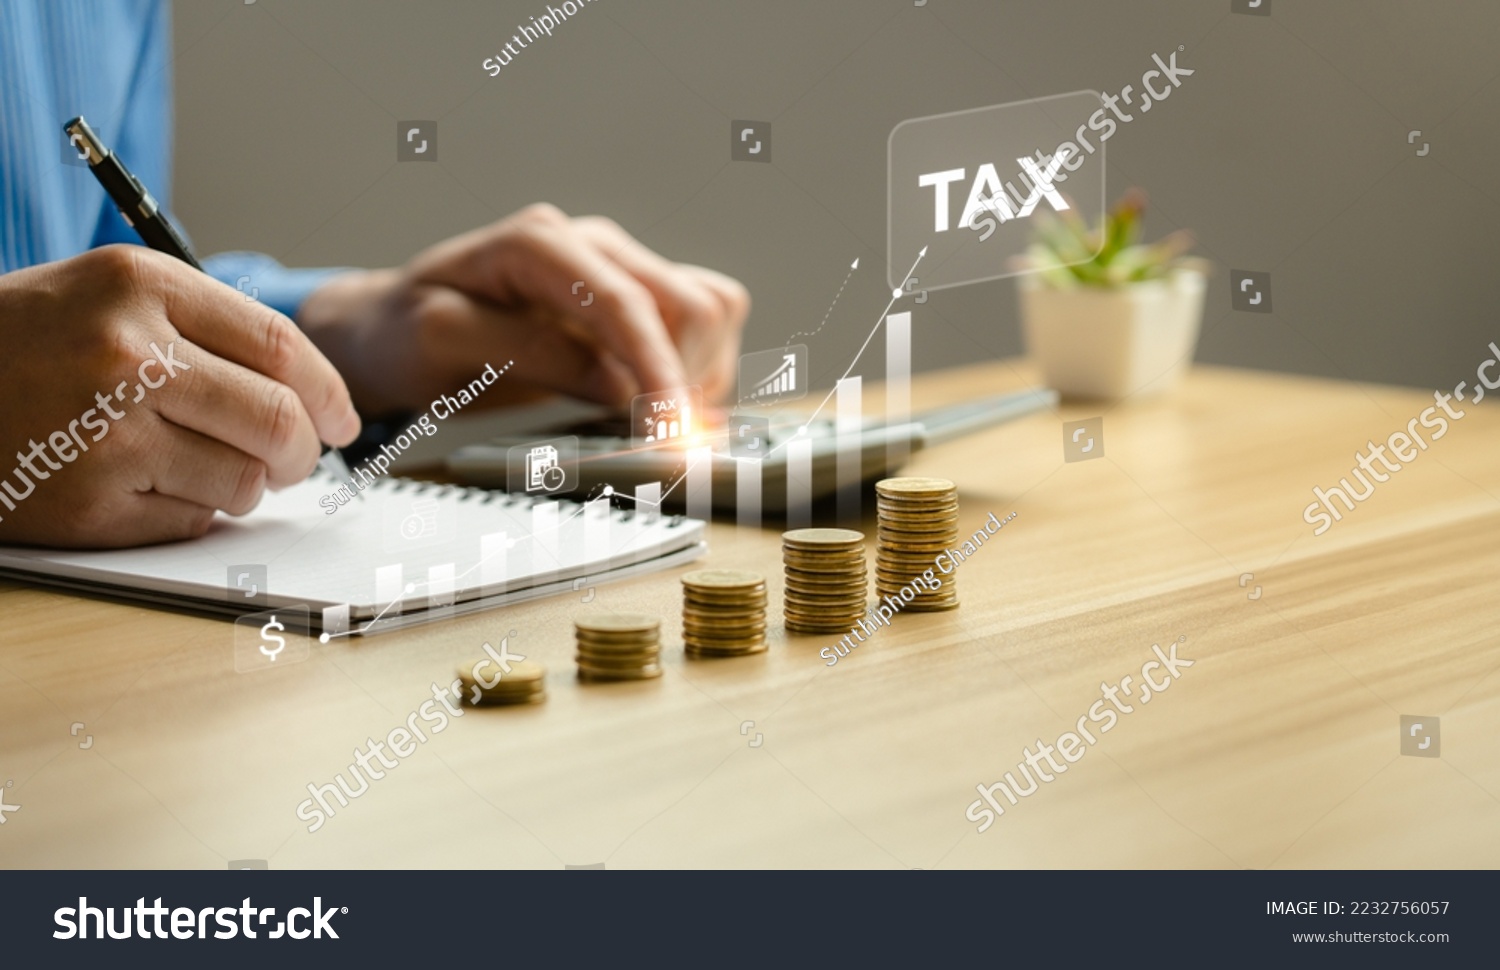 Tax payment and tax deduction planning involve strategies to minimize tax liability. This includes maximizing deductions and credits, deferring income, and accelerating deductions. tax professional #2232756057